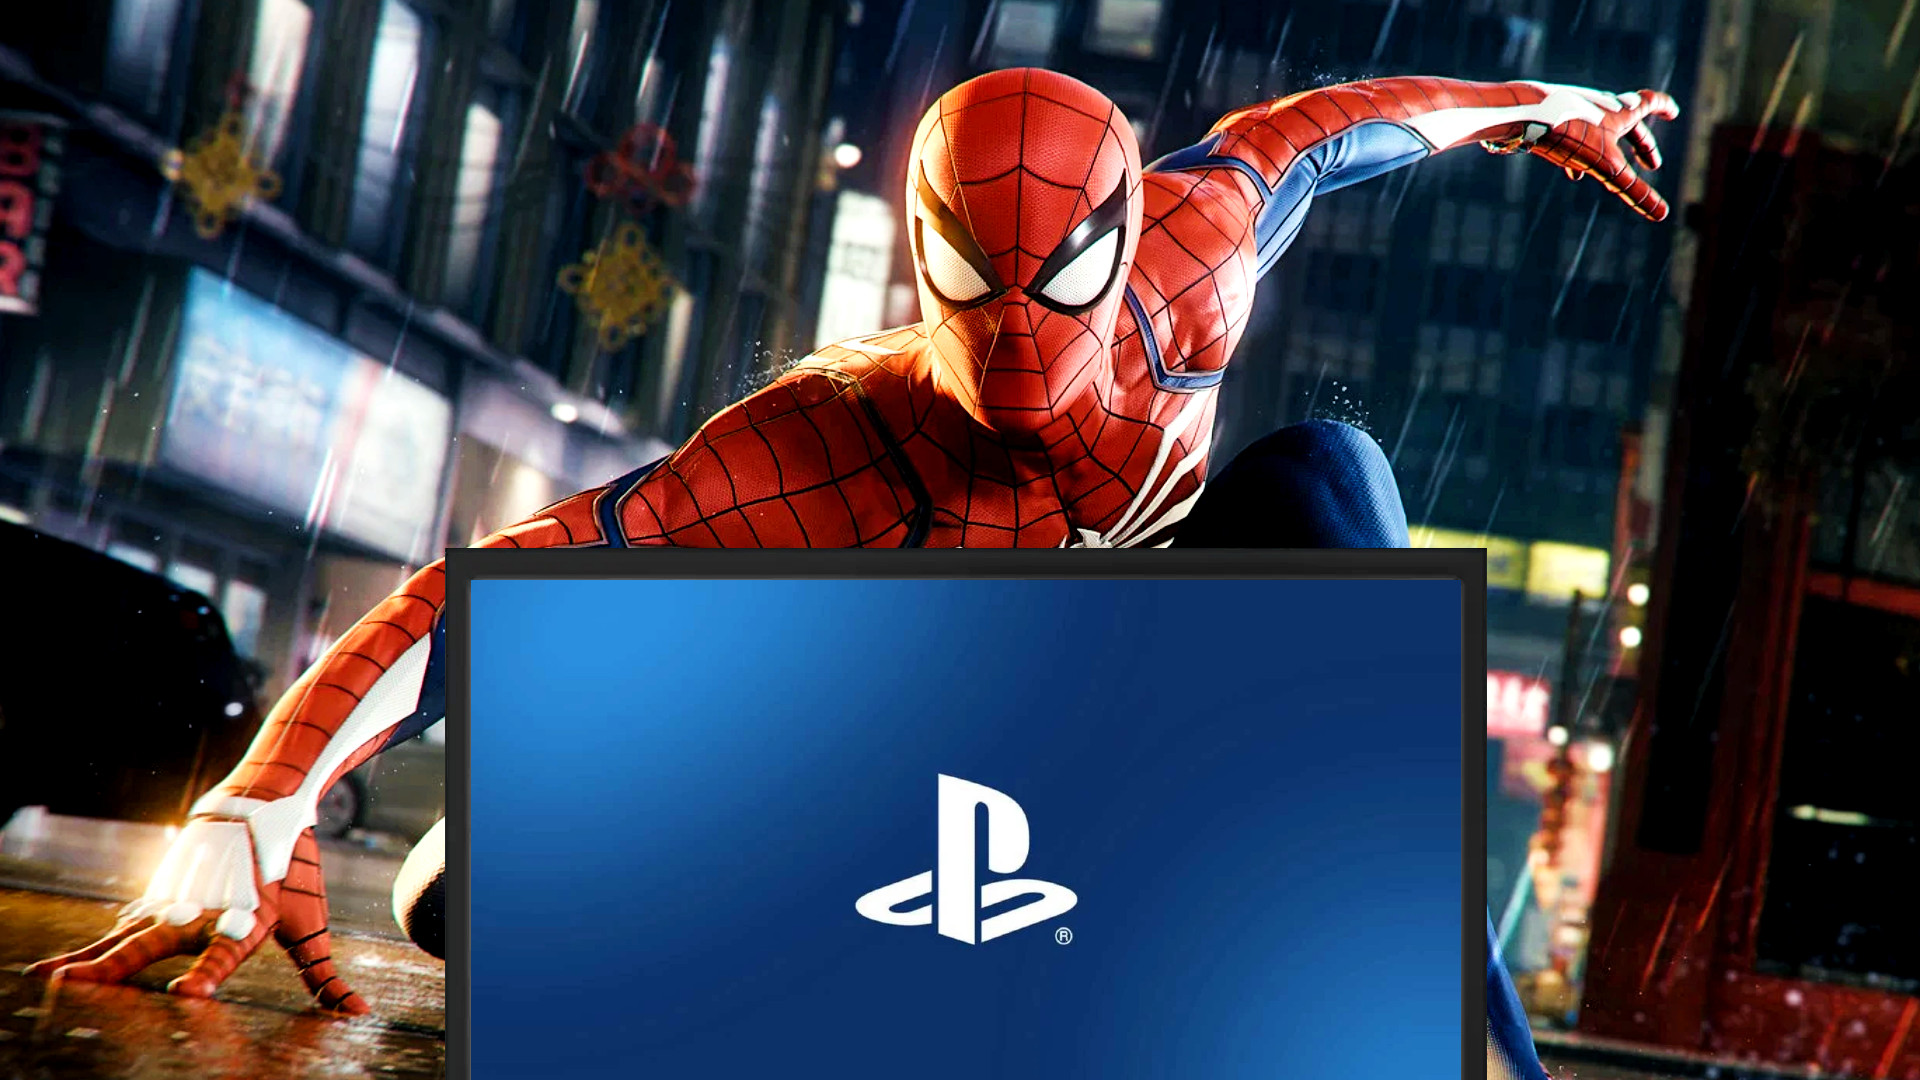 PlayStation PC launcher” spotted in Spider-Man Remastered | PCGamesN